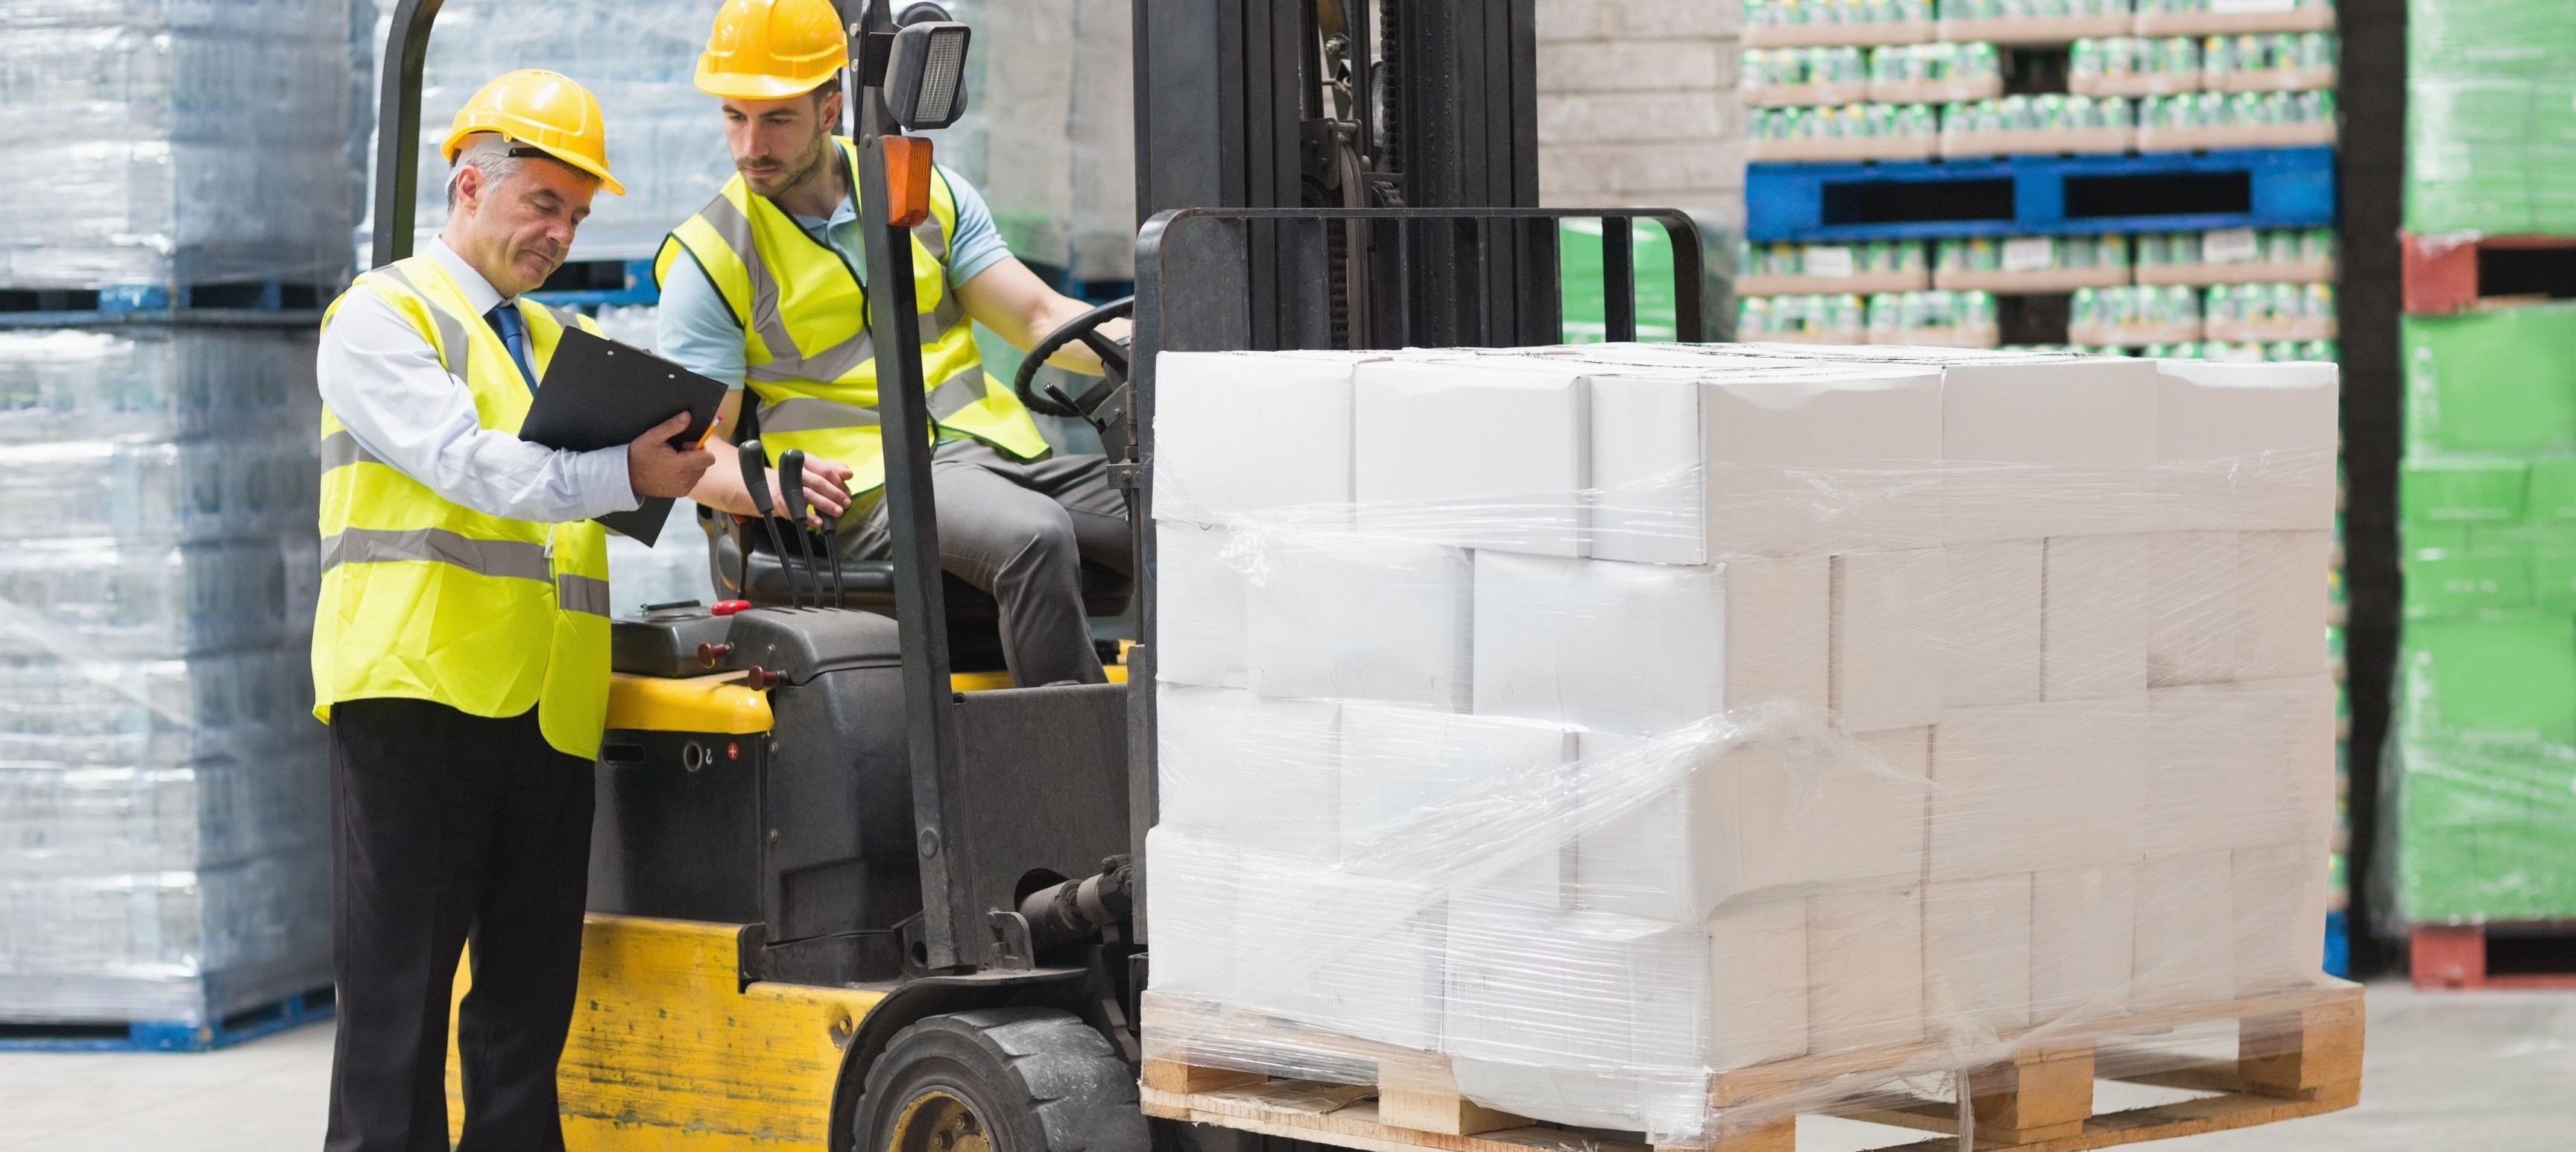 Understanding Forklift Weight Limits and Capacities